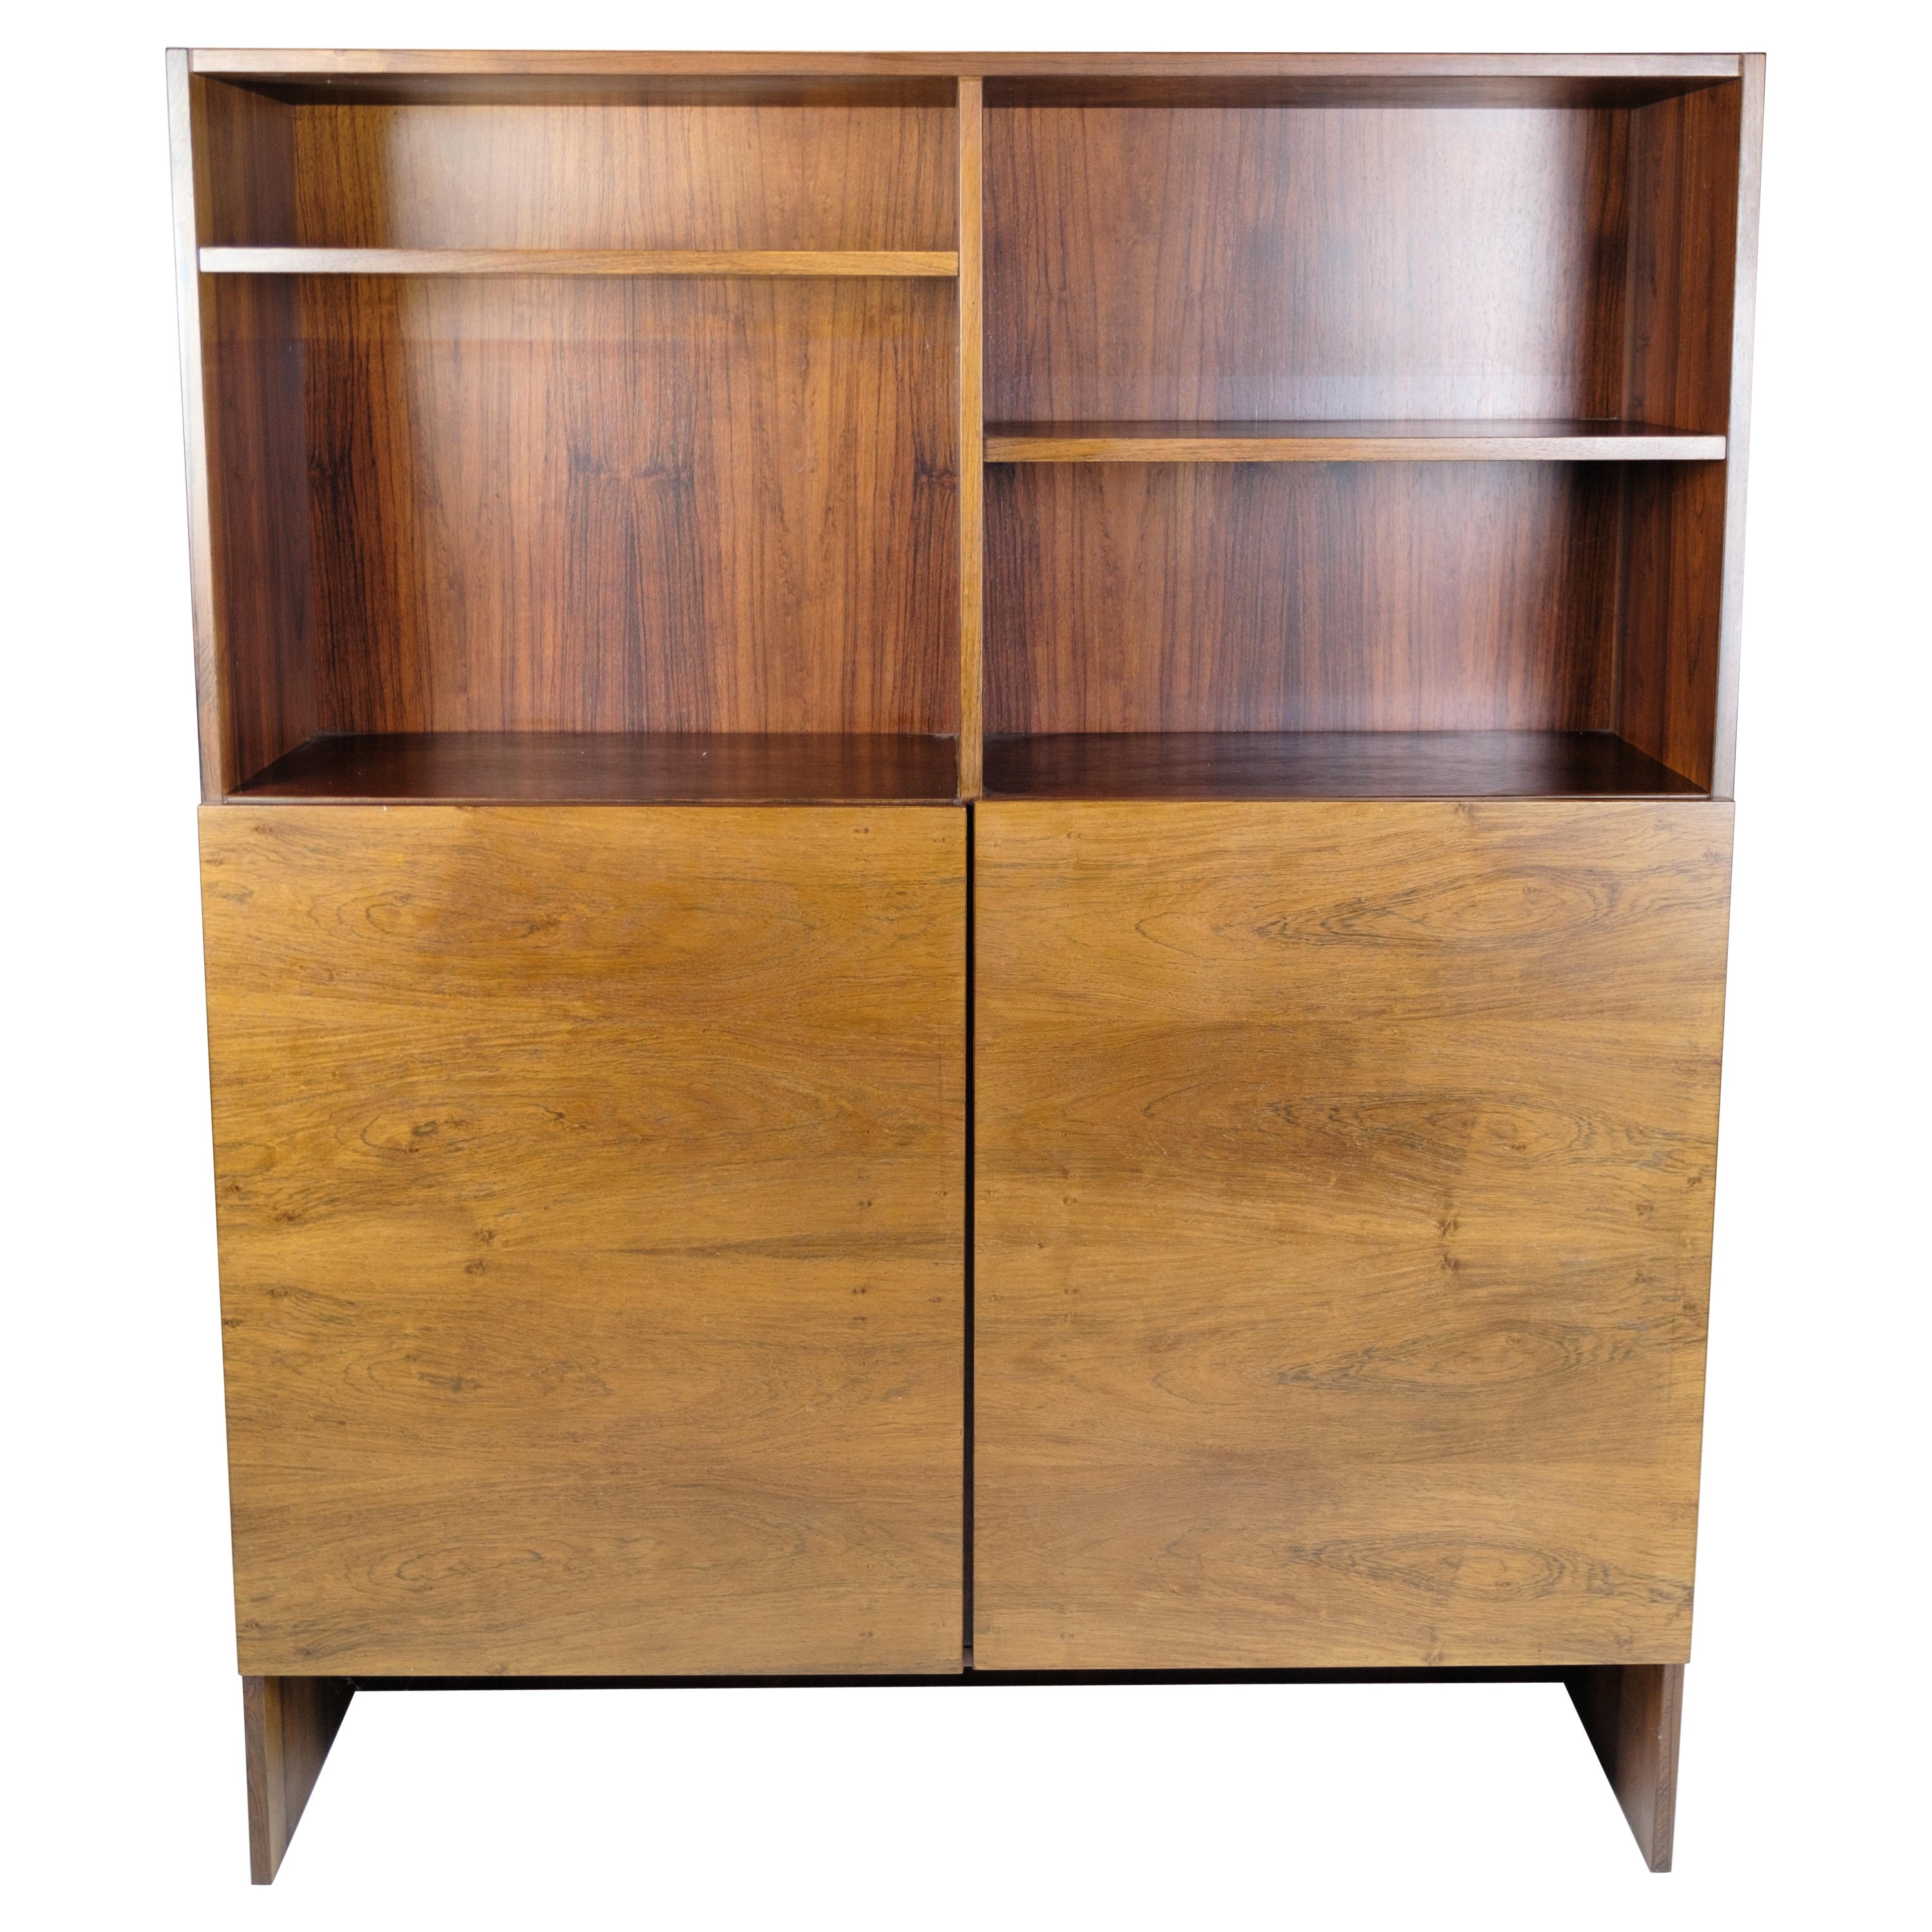 Bookcase Made In Rosewood, Danish Design From 1960s For Sale